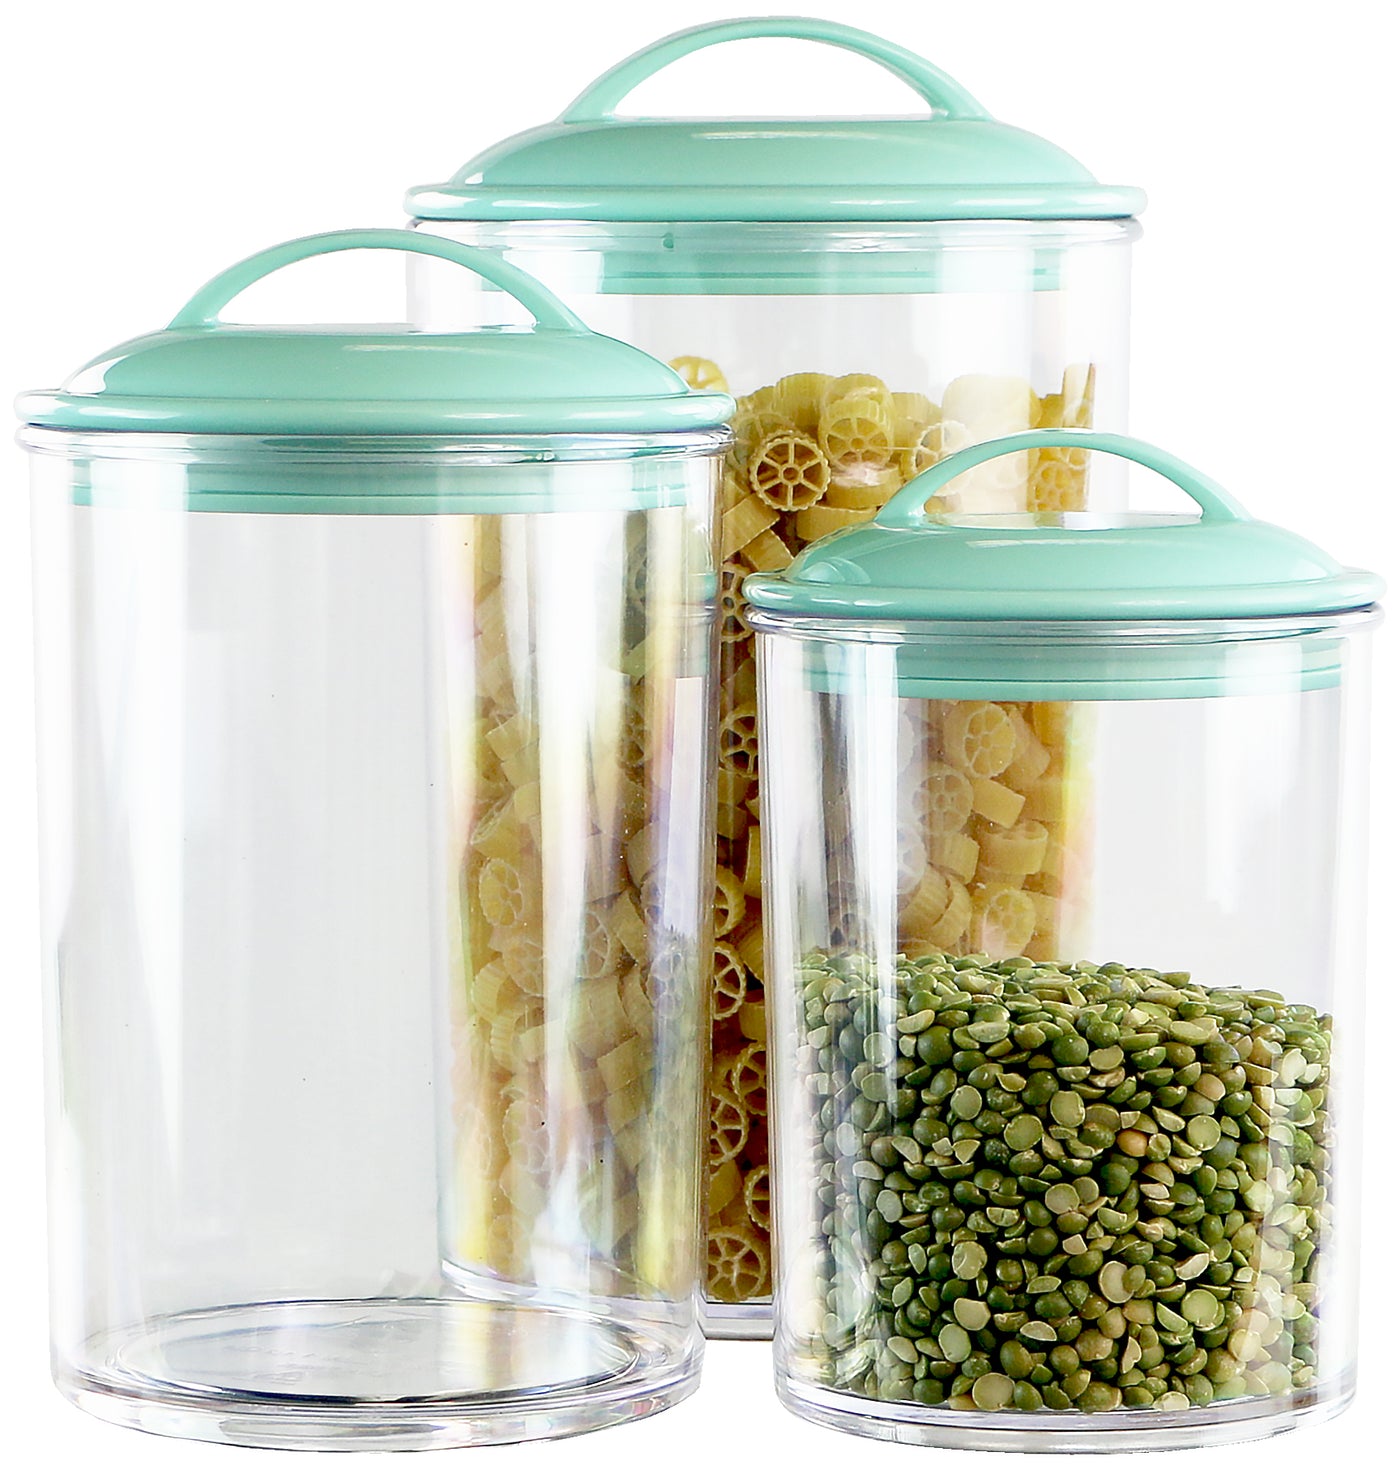 Bellemain 4 Piece Airtight Acrylic Canister Set, Food Storage Container